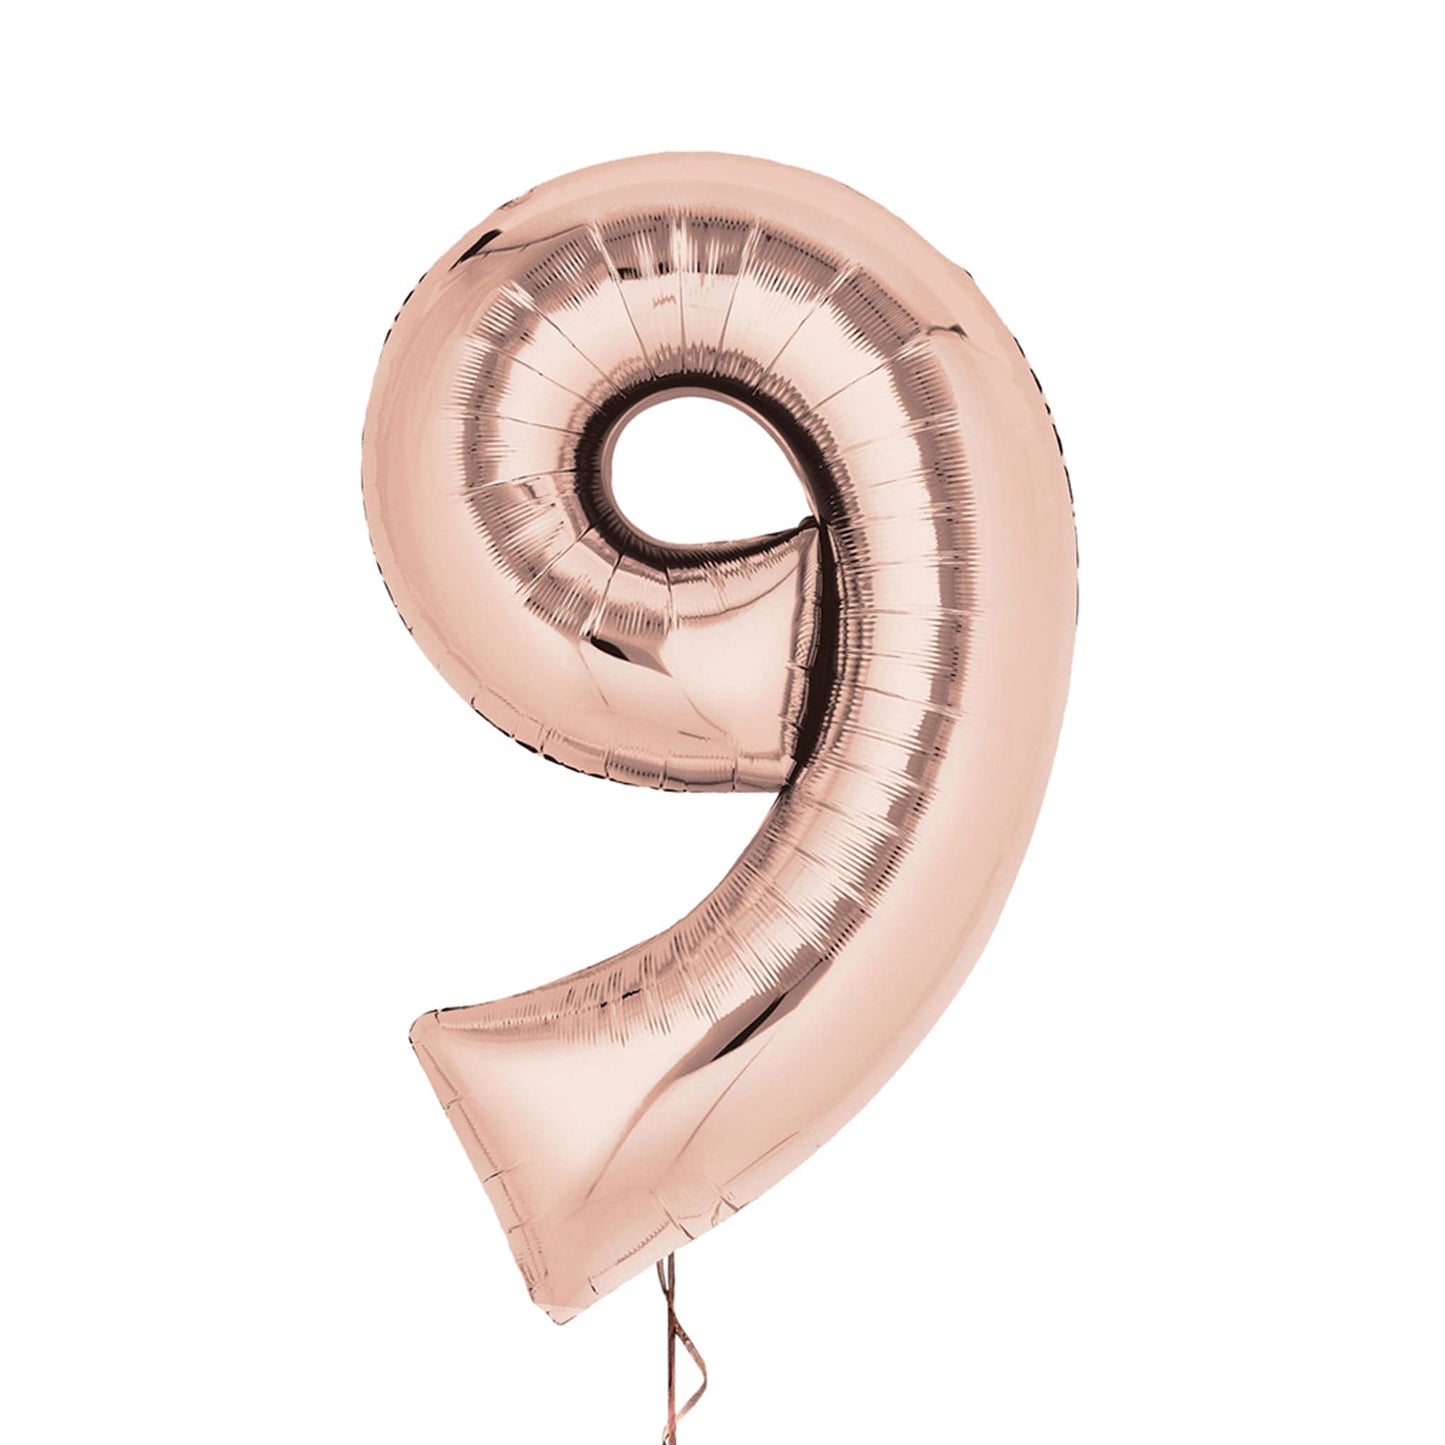 Castle Balloons 9 Rose Gold Giant Helium Numbers